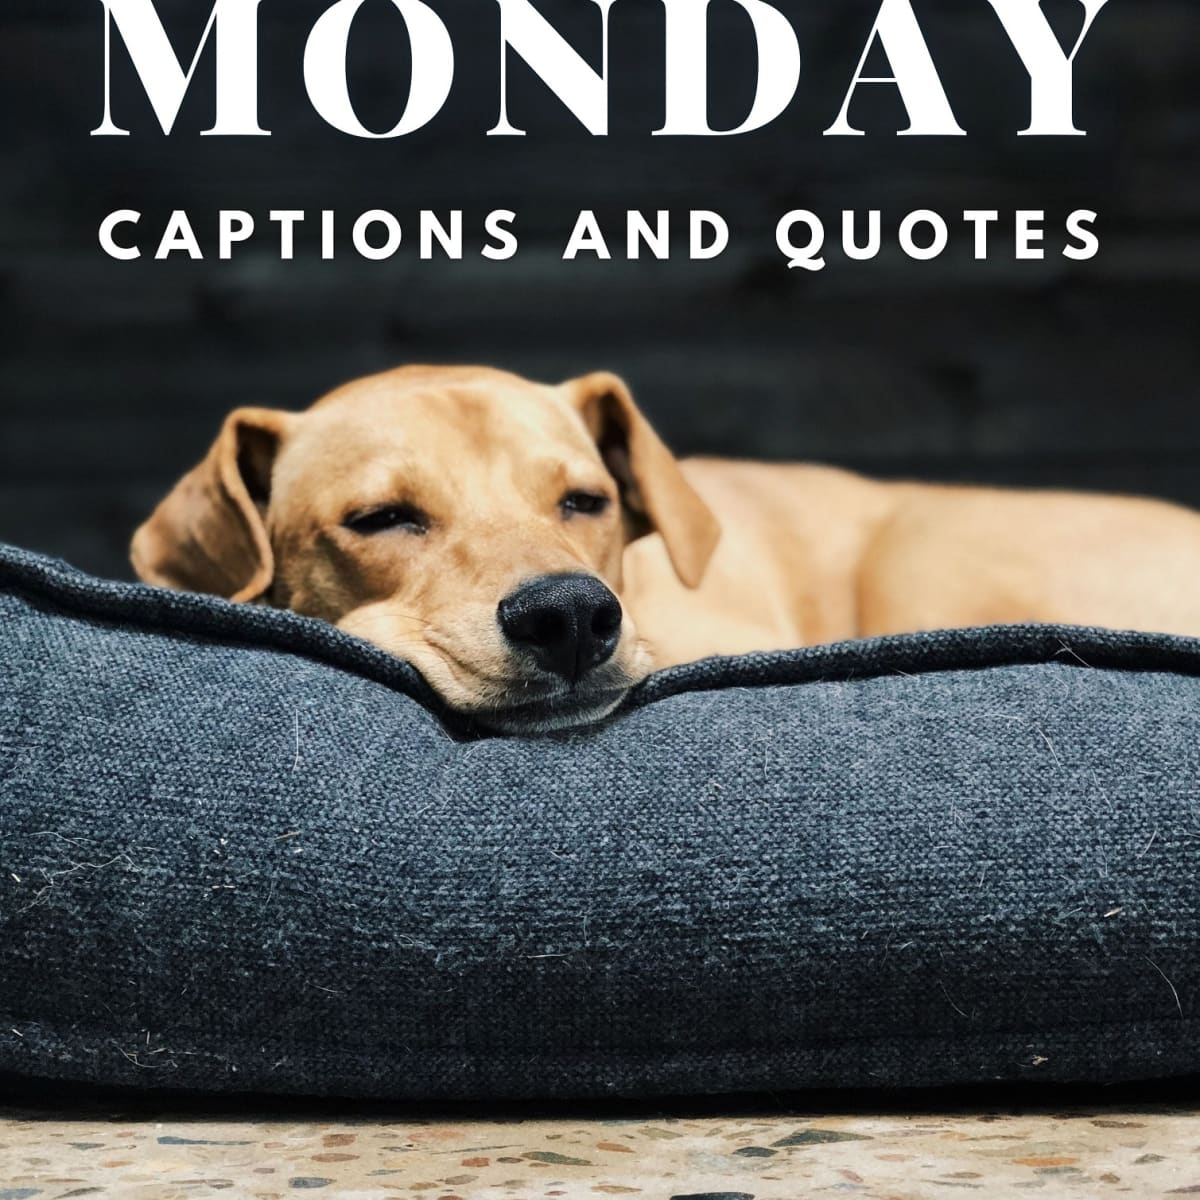 150+ Monday Quotes and Caption Ideas for Instagram - TurboFuture